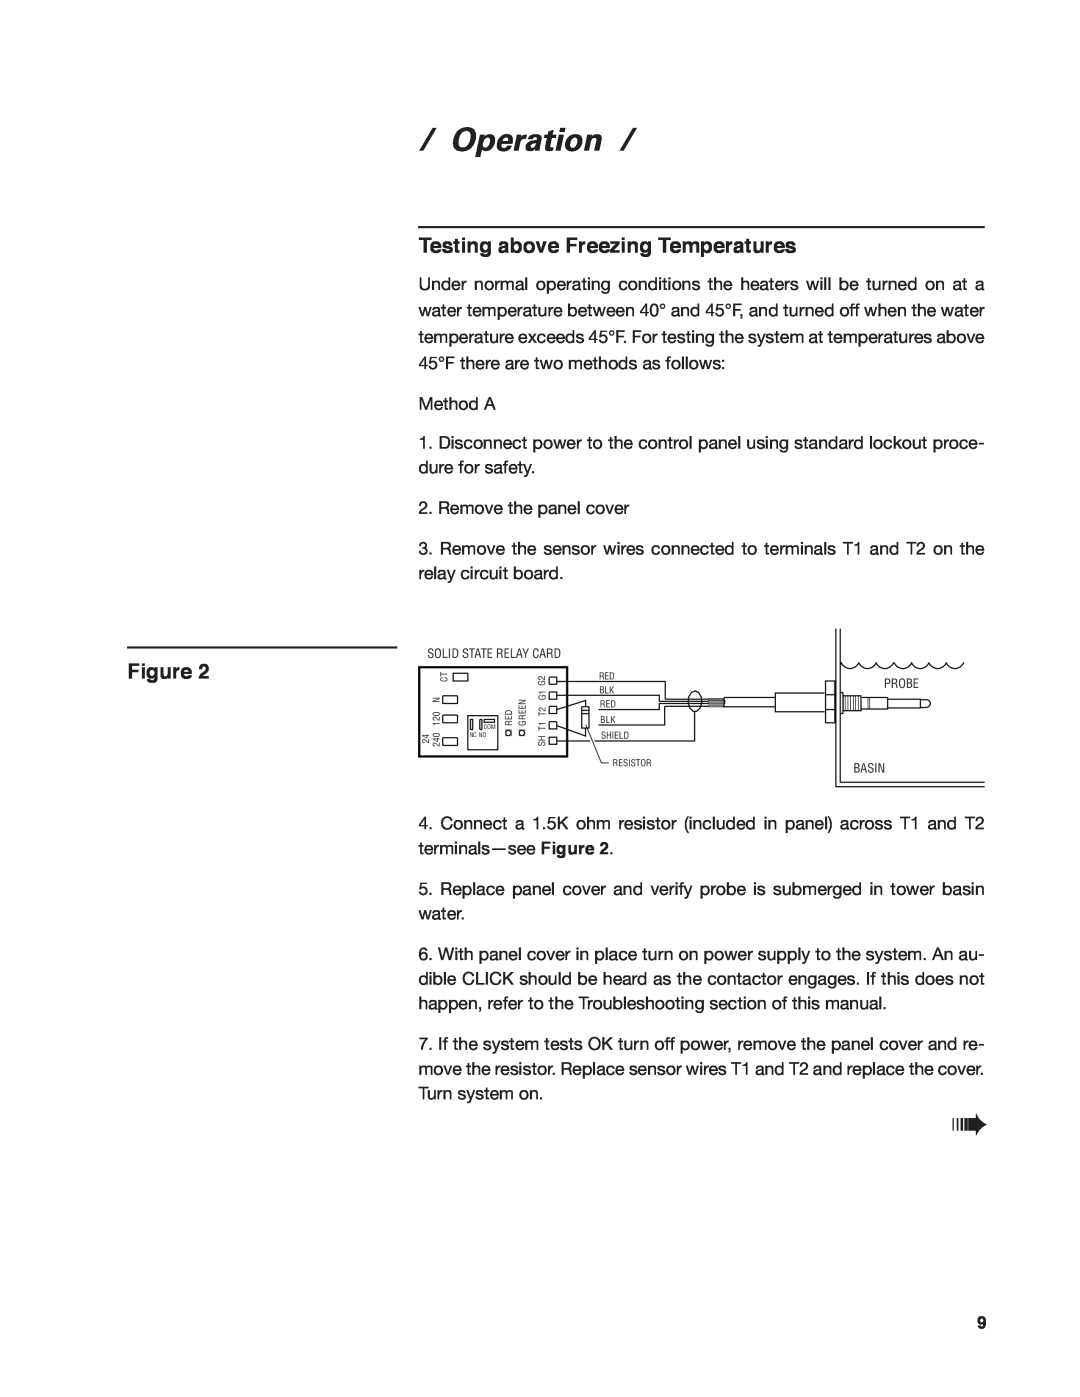 SPX Cooling Technologies 92-1322C user manual Testing above Freezing Temperatures, Operation 